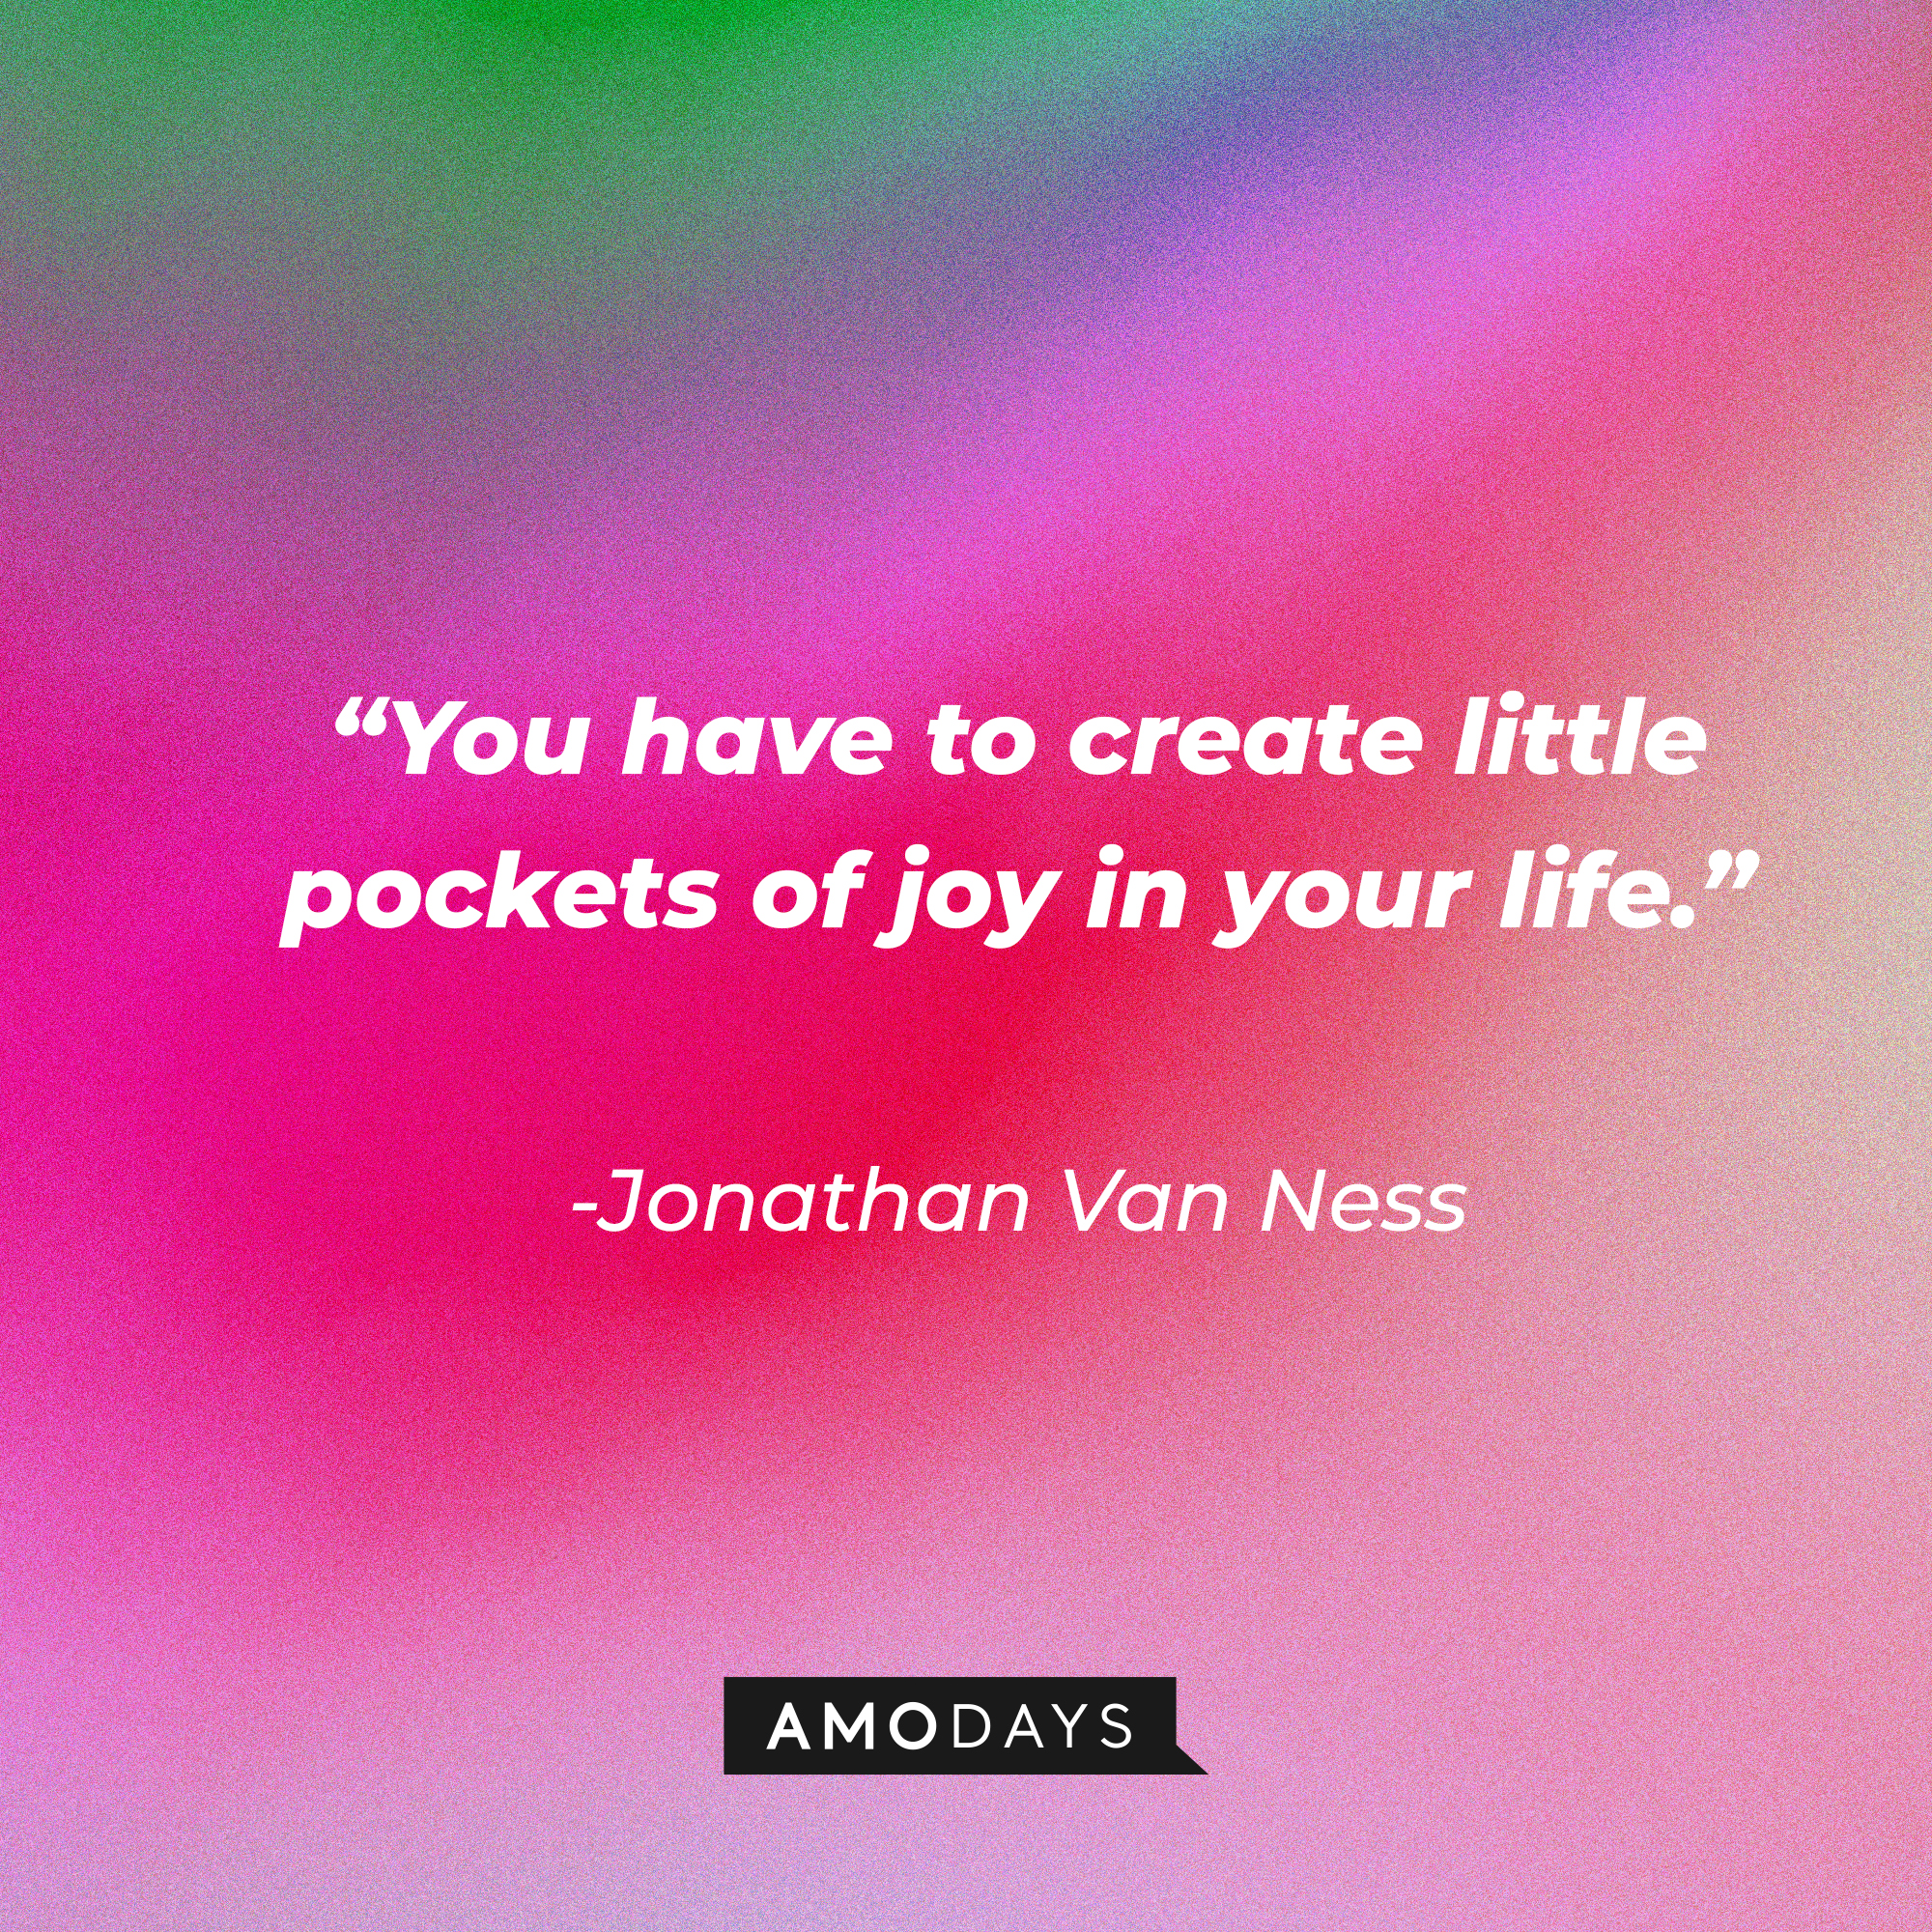 Jonathan Van Ness’s quote: “You have to create little pockets of joy in your life.” | Source: AmoDays